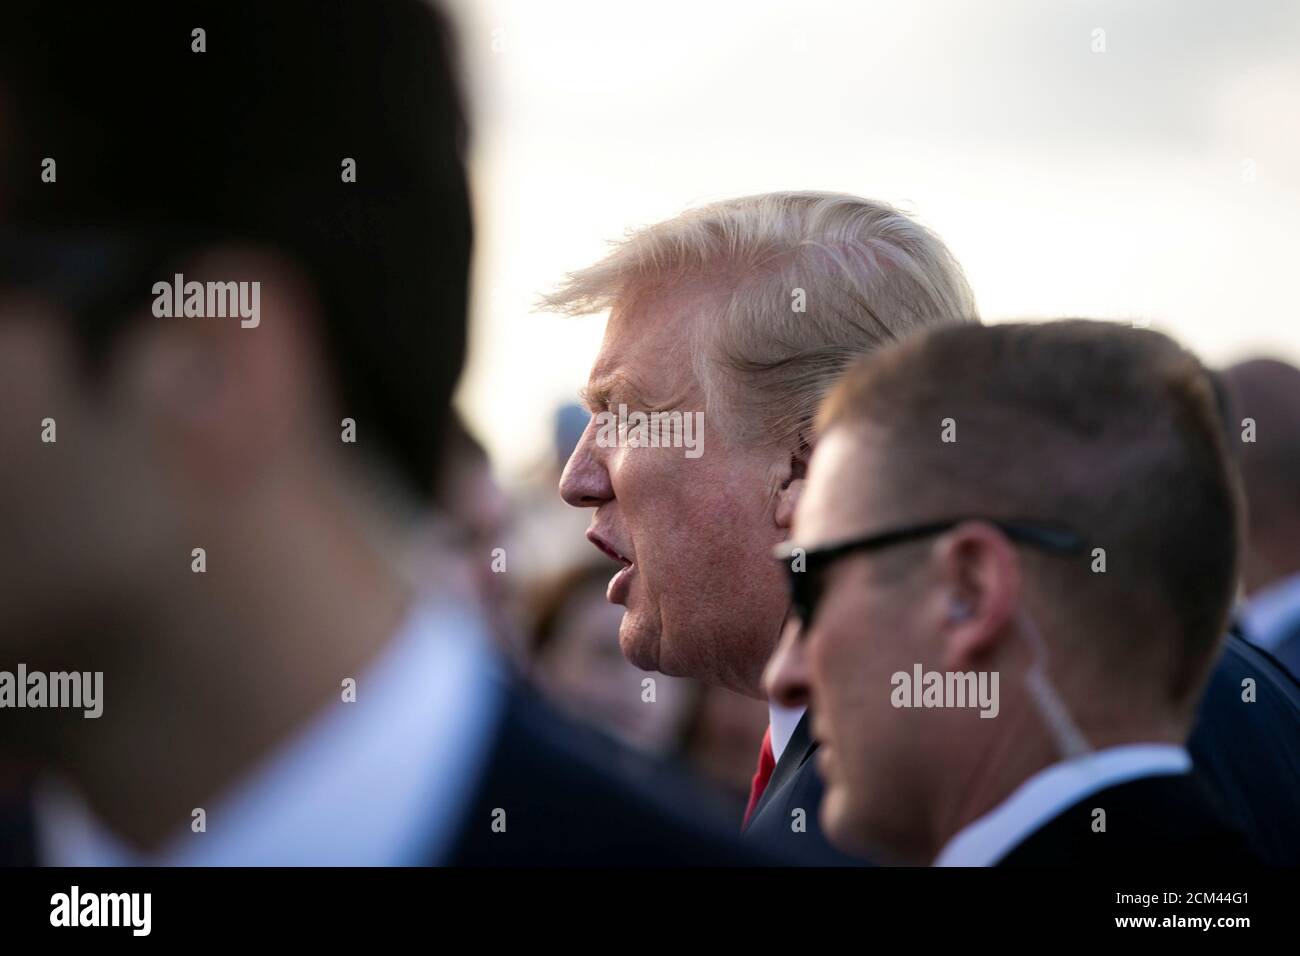 U.S. President Donald Trump greets supporters on the tarmac at Palm Beach International Airport, as he arrives to spend Easter weekend at his Mar-a-Lago club, Florida, U.S., April 18, 2019. REUTERS/Al Drago Stock Photo